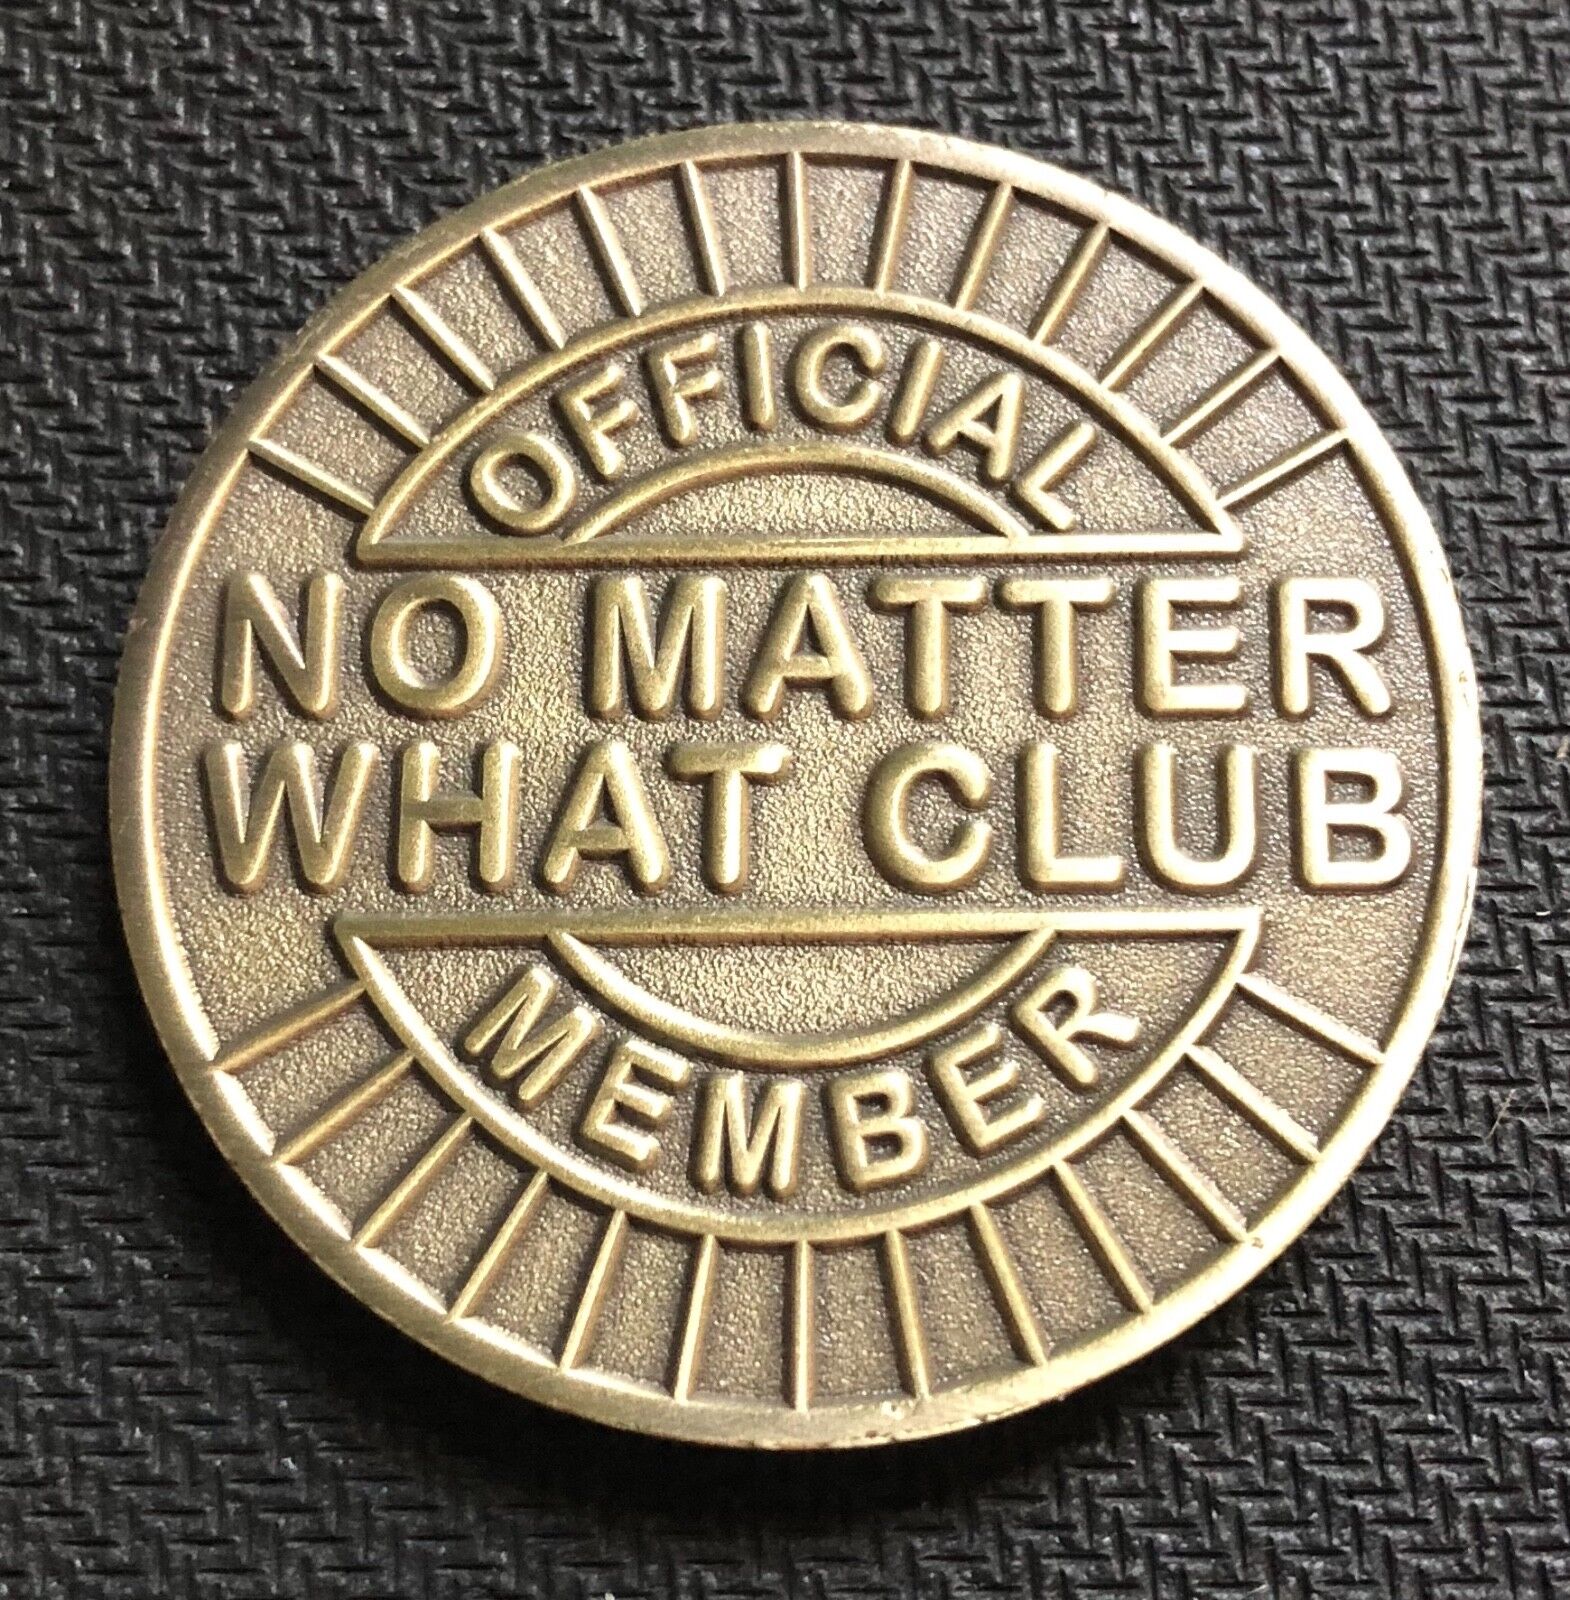 Narcotics-Anonymous-AA-NA-Bronze-Medallion-Coin-No Matter What Club